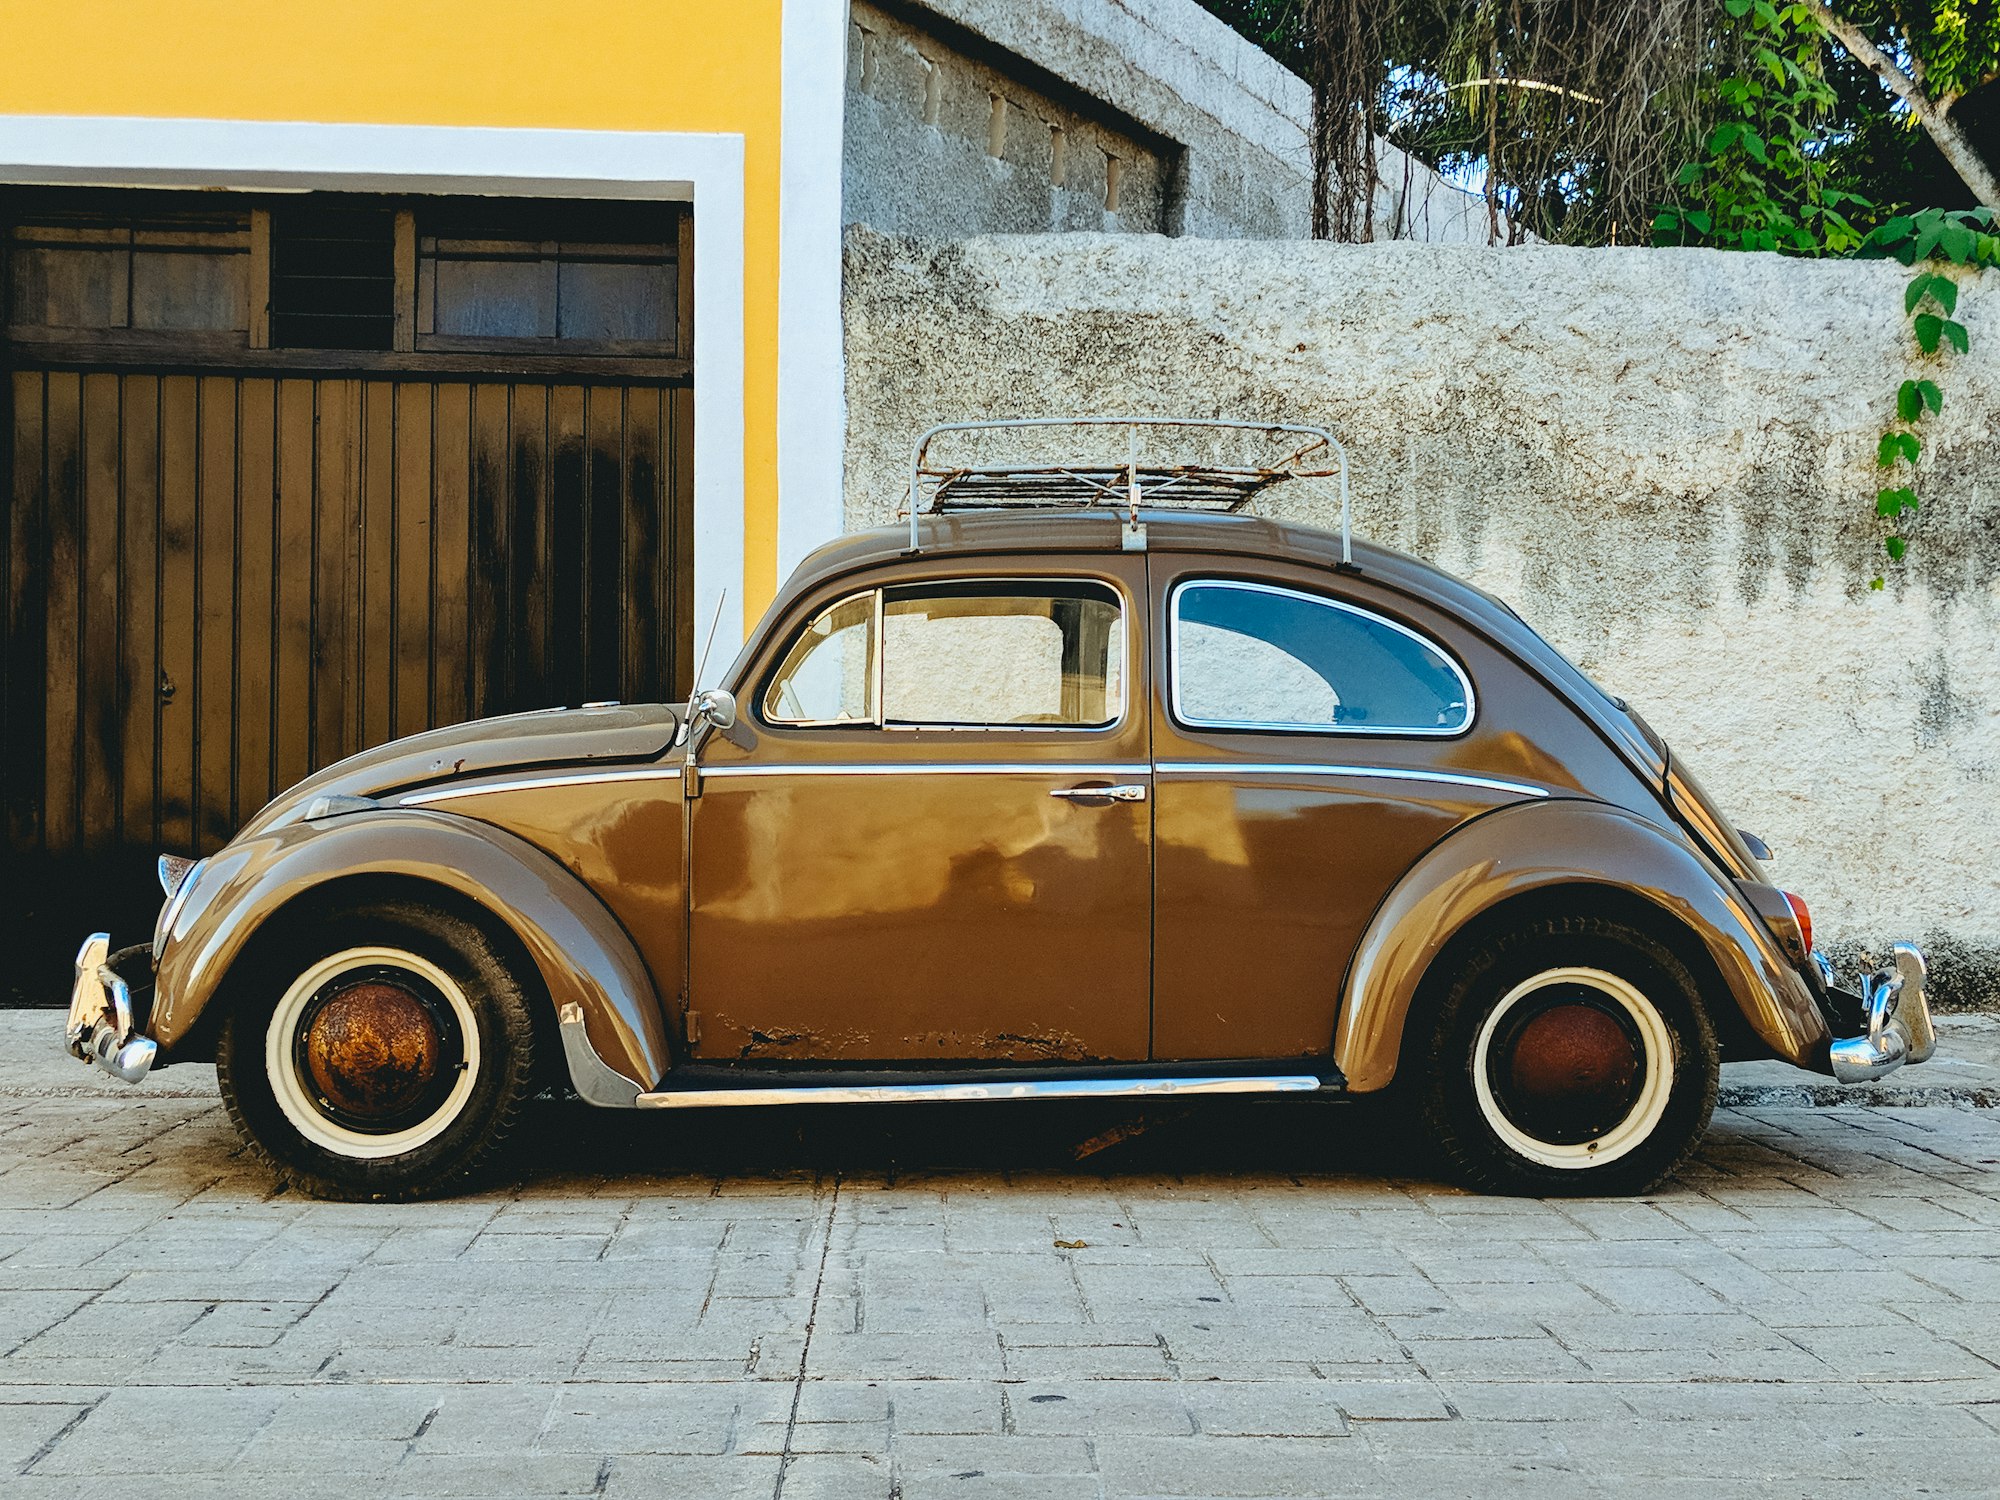 Selling your fist car privately, a gold VW Bug